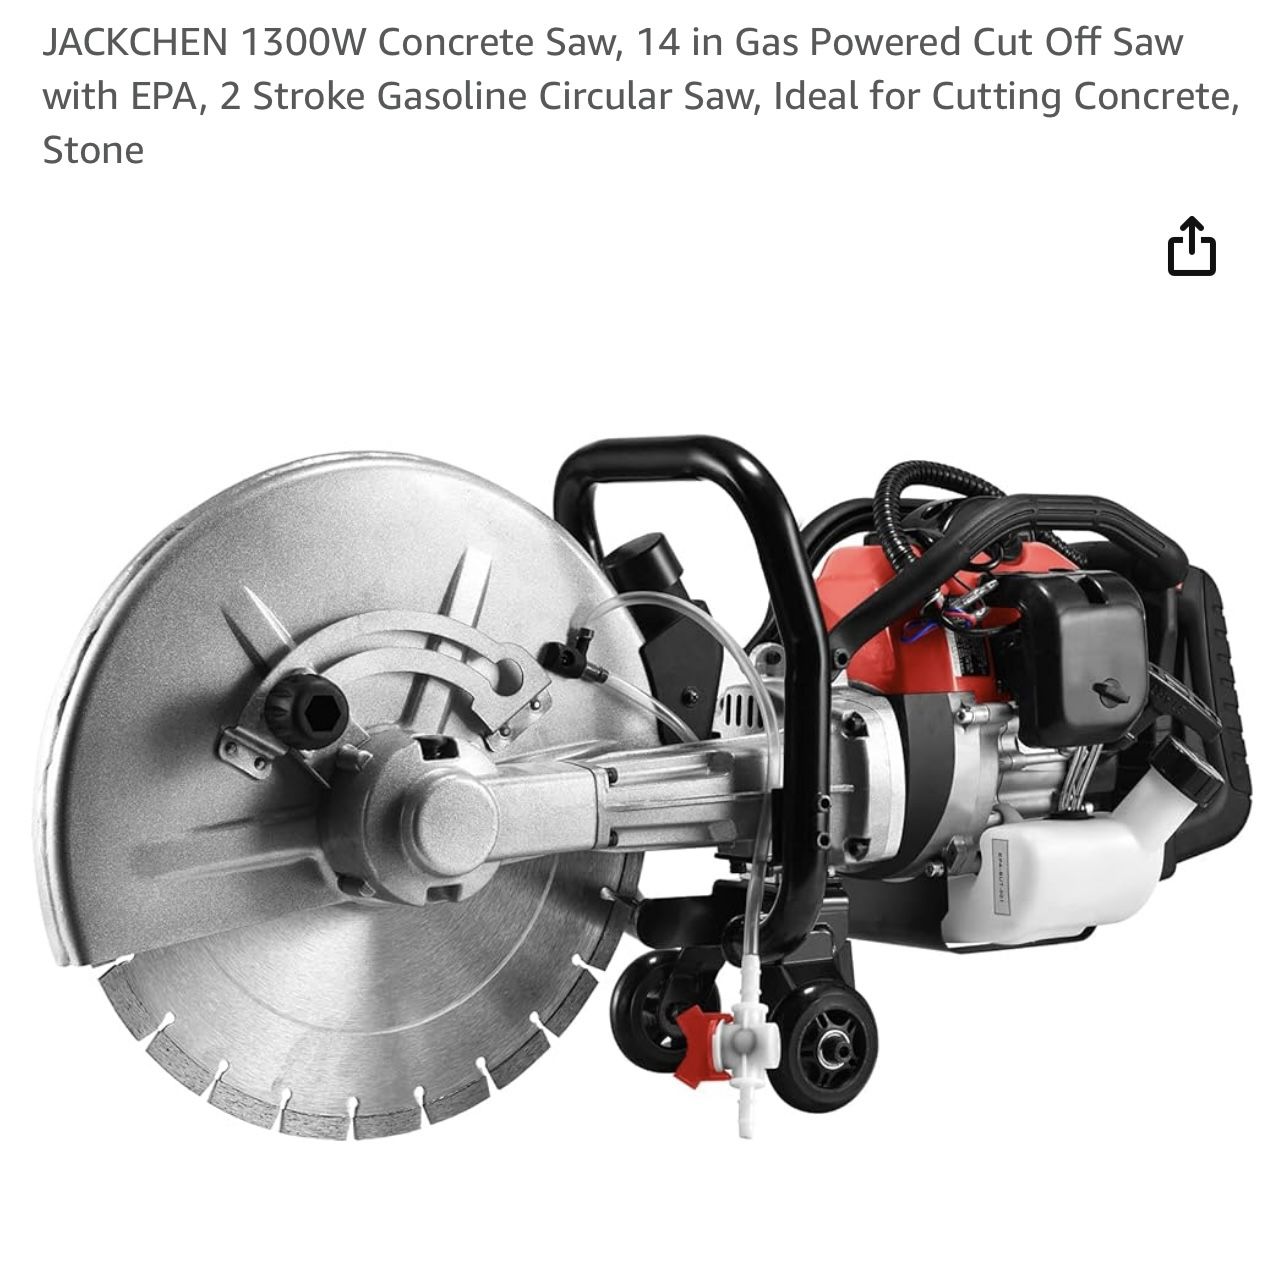 JACKCHEN 1300W Concrete Saw, 14 in Gas Powered Cut Off Saw with EPA, 2 Stroke Gasoline Circular Saw, Ideal for Cutting Concrete, Stone  